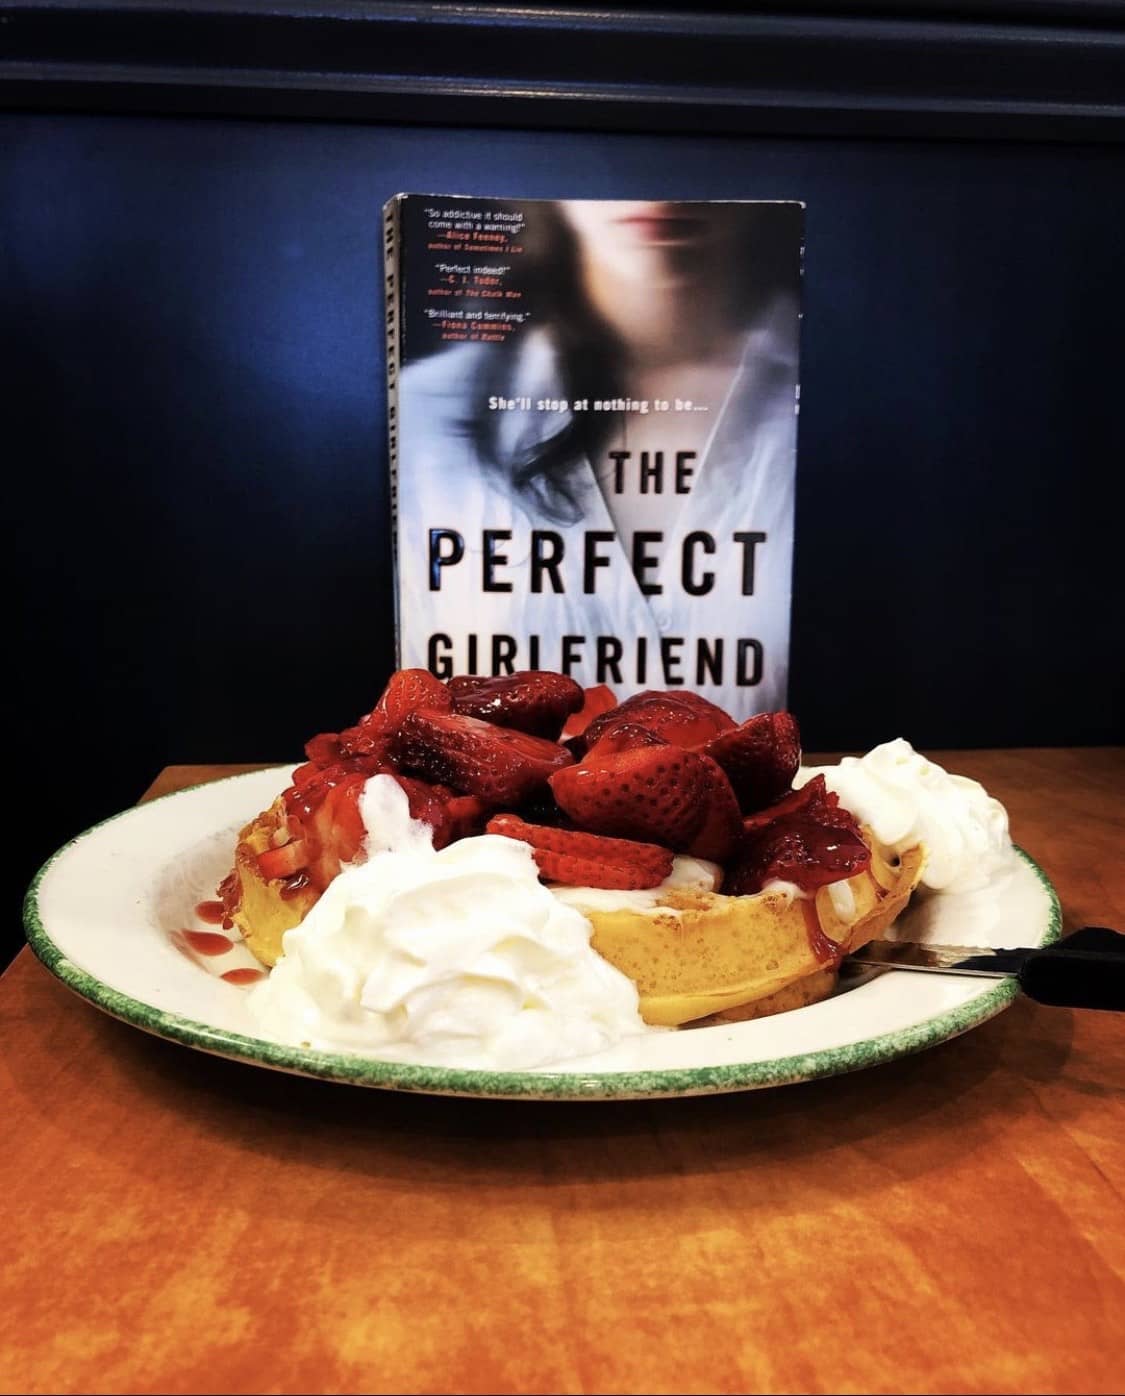 the perfect girlfriend by karen hamilton book with a plate full of food set on a table